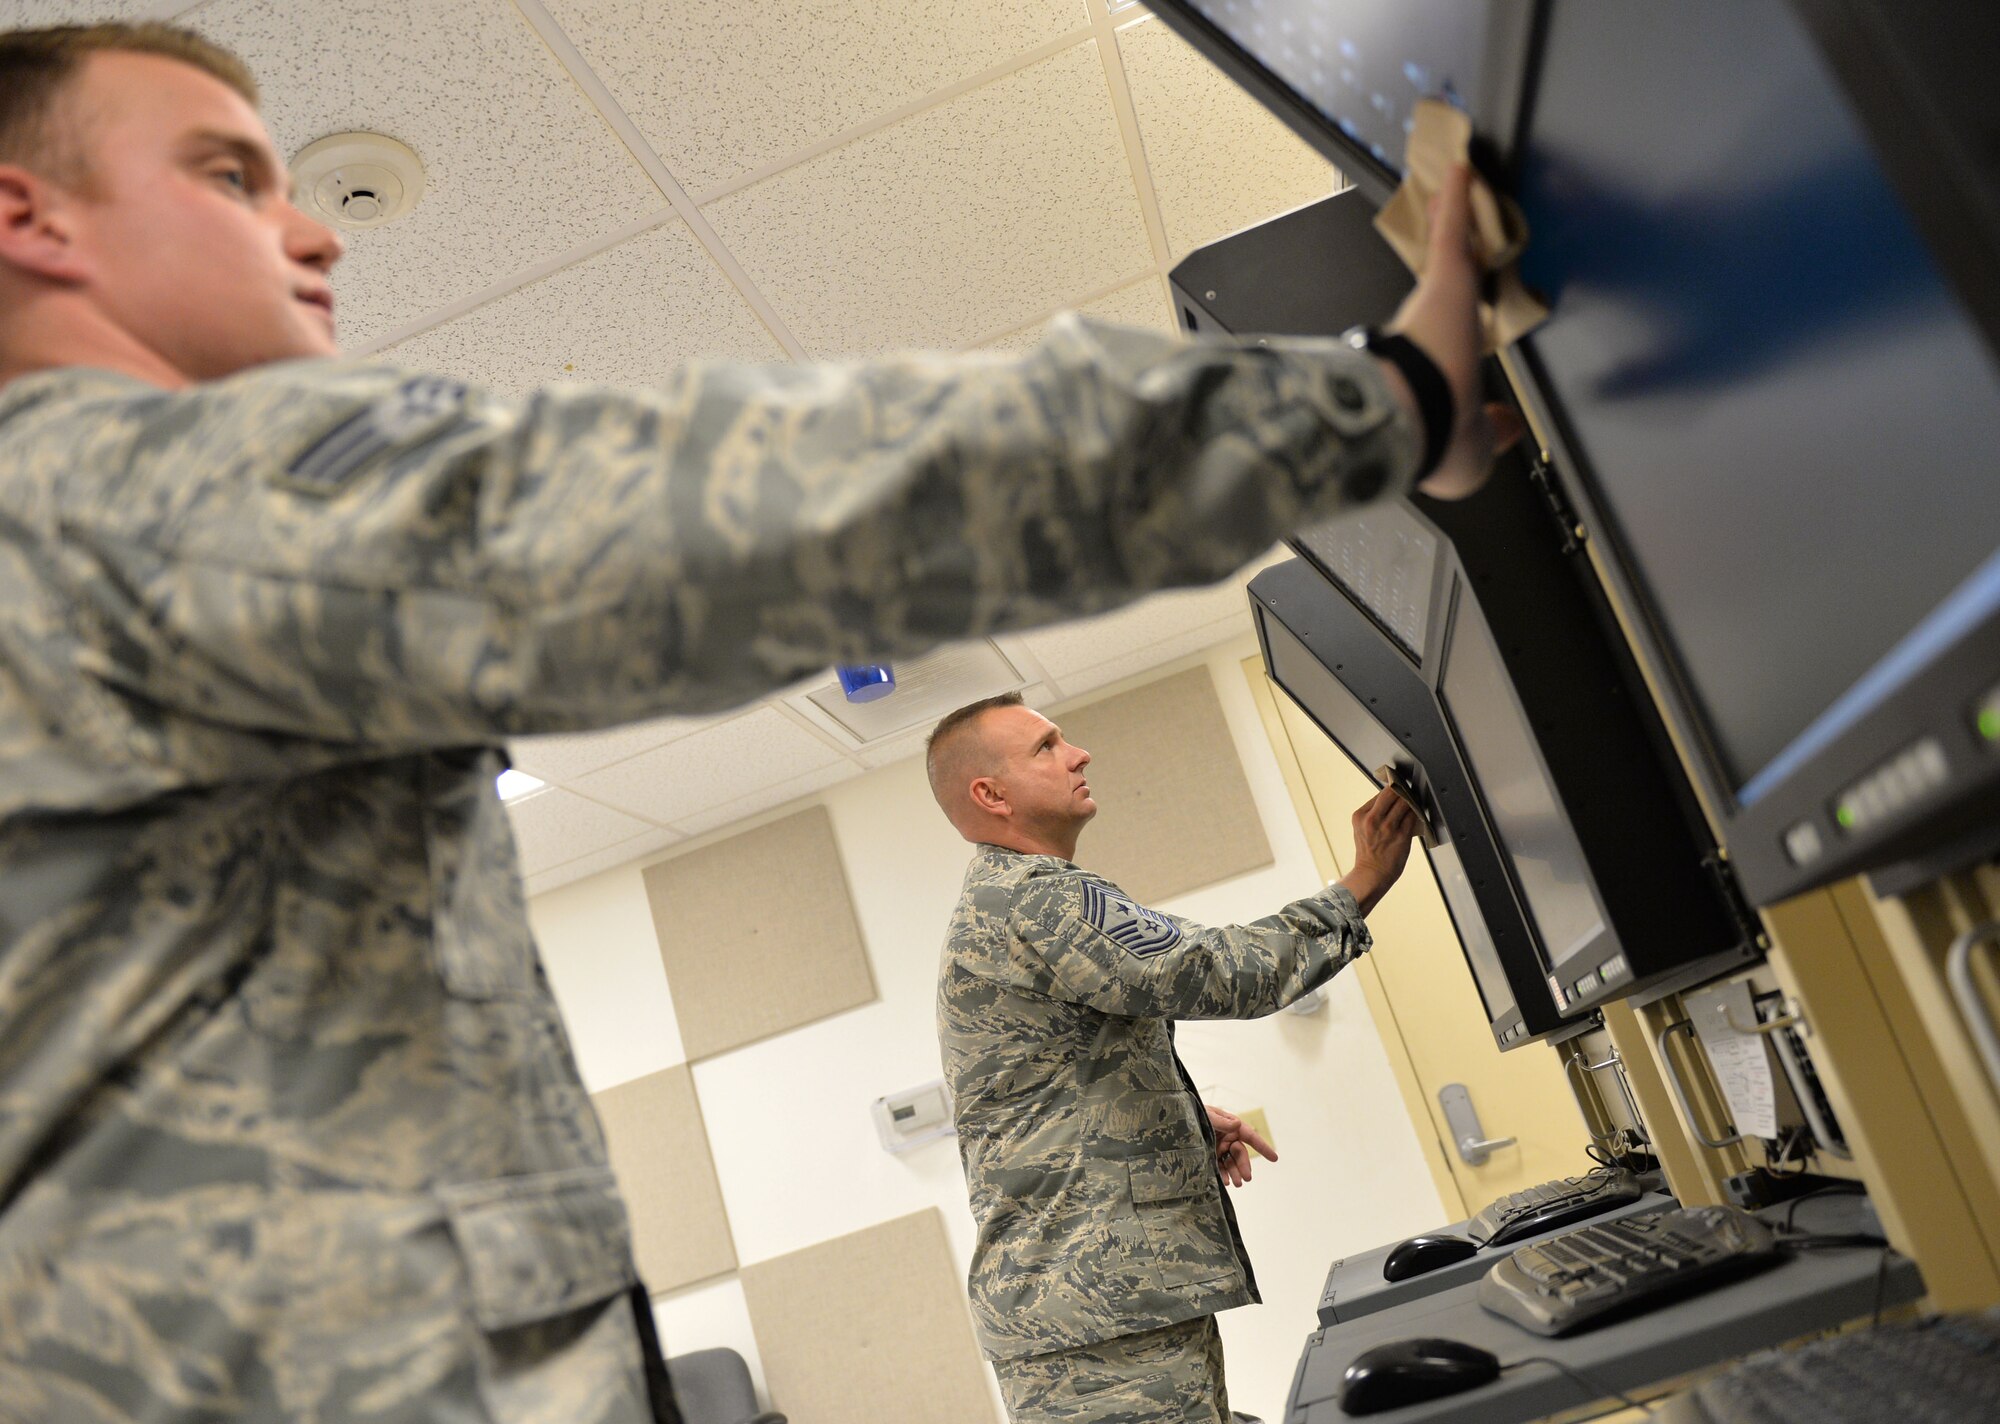 Chief Master Sgt. Michael Ditore, the 432nd Wing/432nd Air Expeditionary Wing command chief, right, cleans monitors with Senior Airman Robert, a 432nd Aircraft Communications Maintenance Squadron ground control station communications mechanic, Feb. 11, 2016, at Creech Air Force Base, Nev. They were wiping the screens as part of a preventative maintenance inspection. (U.S. Air Force photo/Senior Airman Christian Clausen)